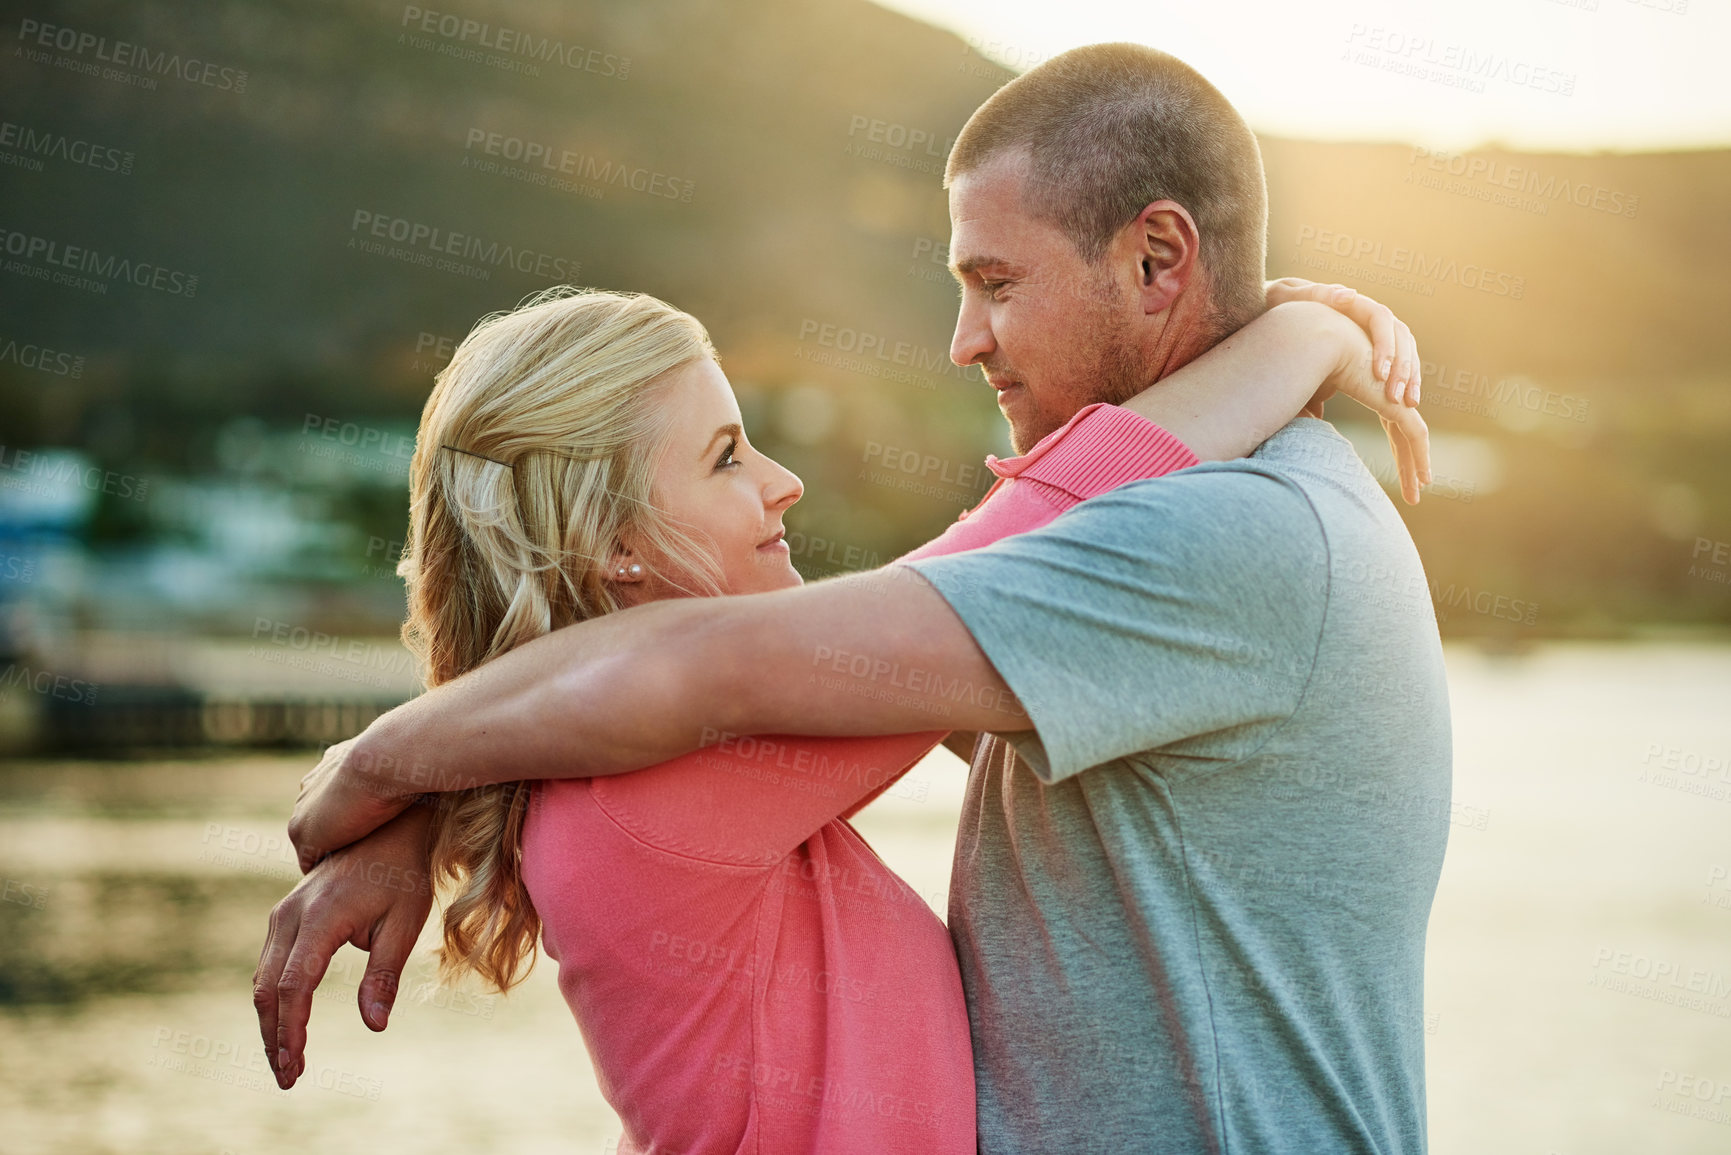 Buy stock photo Shot of an affectionate couple bonding at the beach